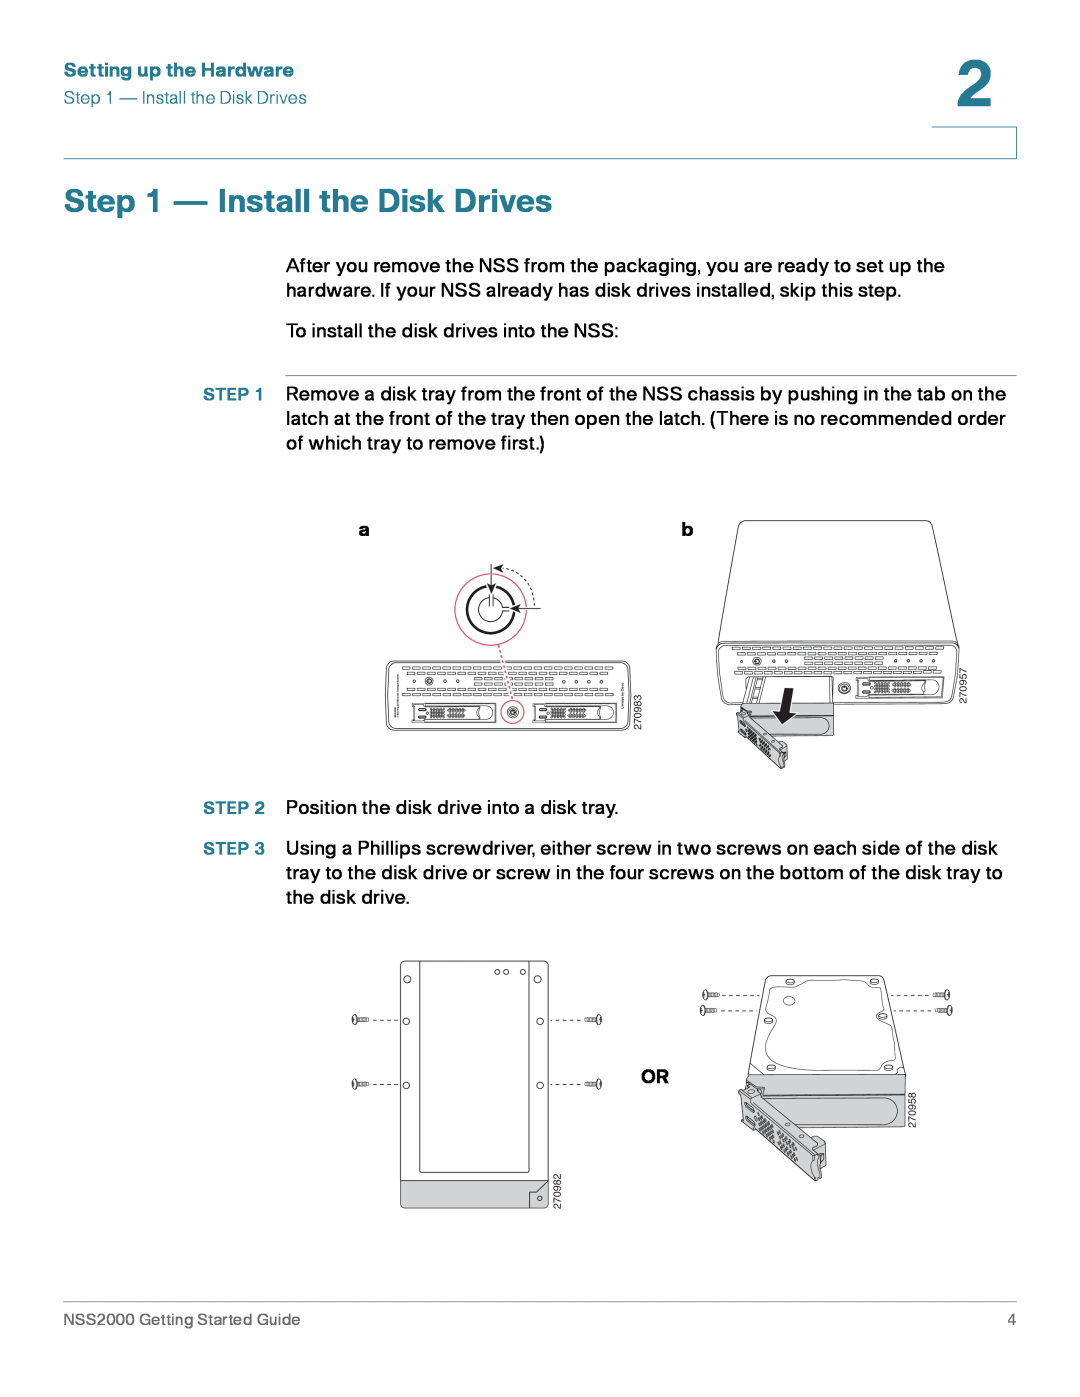 Cisco Systems NSS2000 Series manual Install the Disk Drives, Setting up the Hardware 